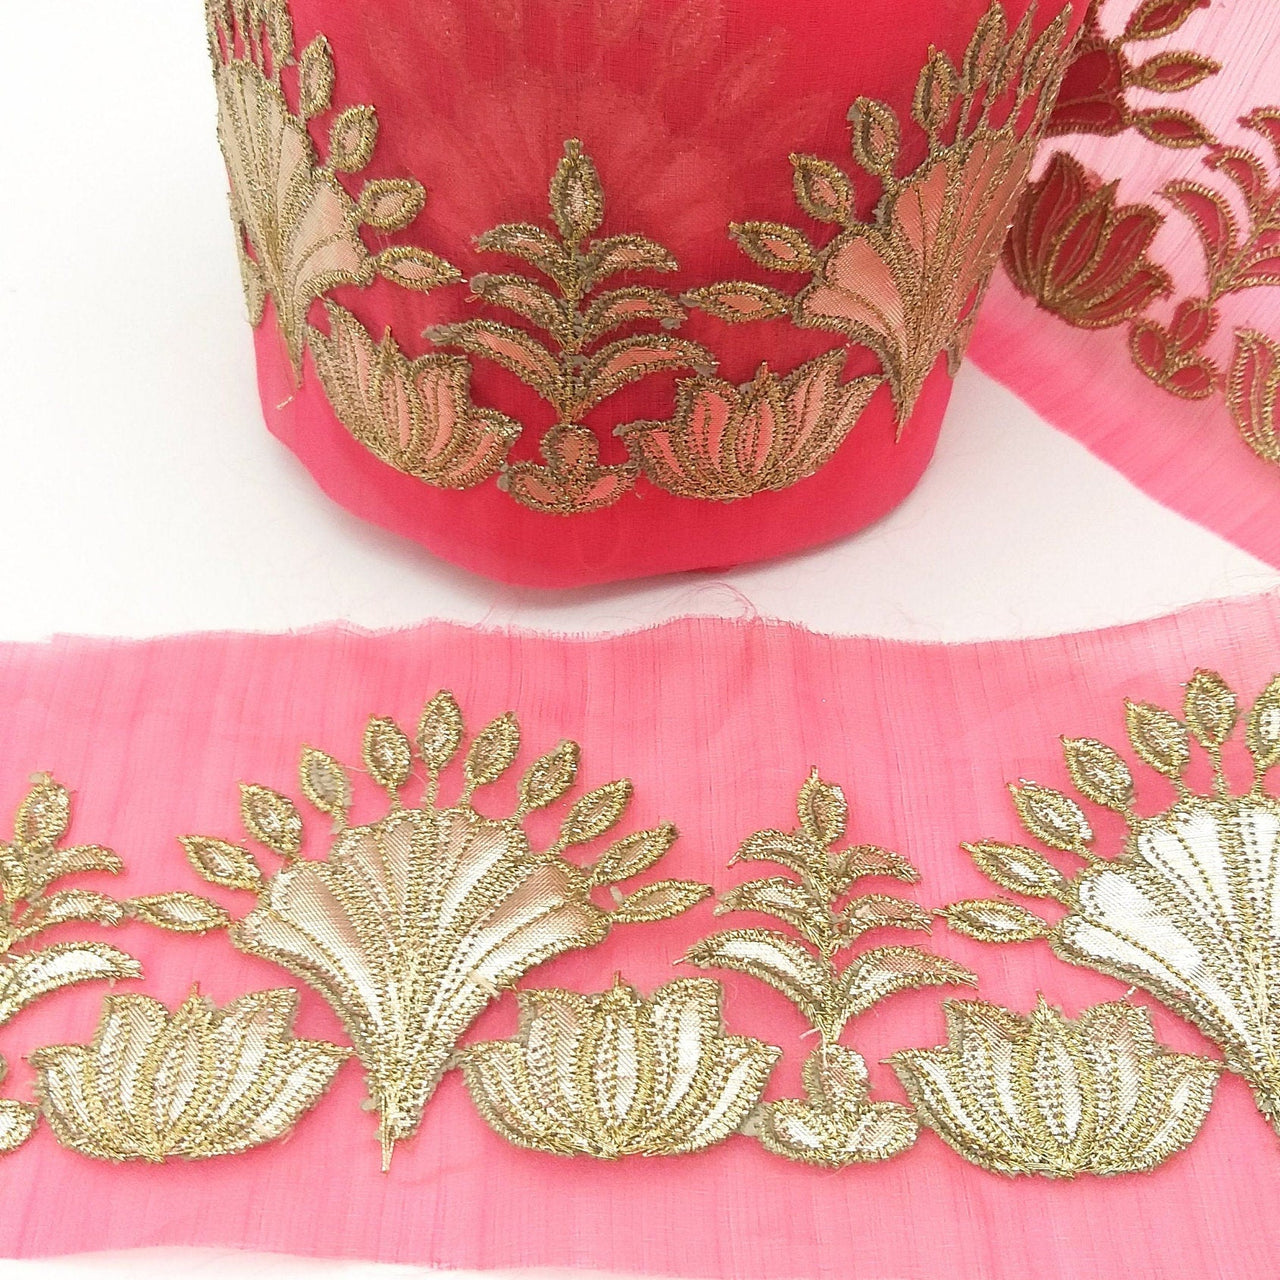 Pink Tissue Fabric Lace Trim with Gota Patti Embroidery, Foiled Embroidery in Silver, Sari Border Trim By Yard Decorative Trim Craft Lace